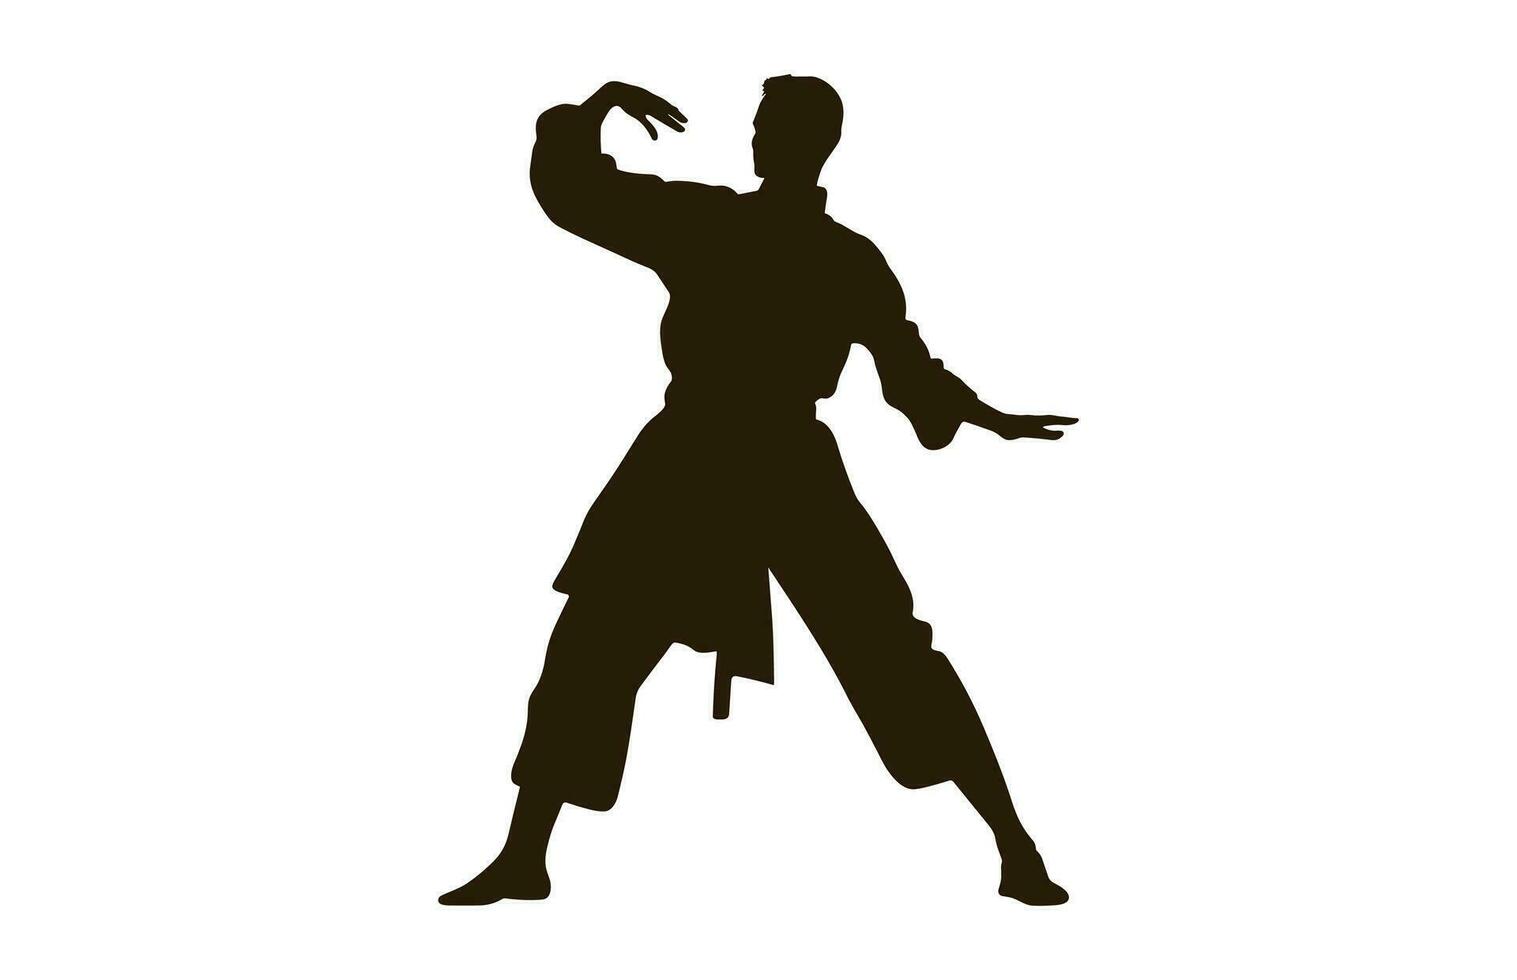 A Tai Chi Pose black Silhouette Vector isolated on a white background